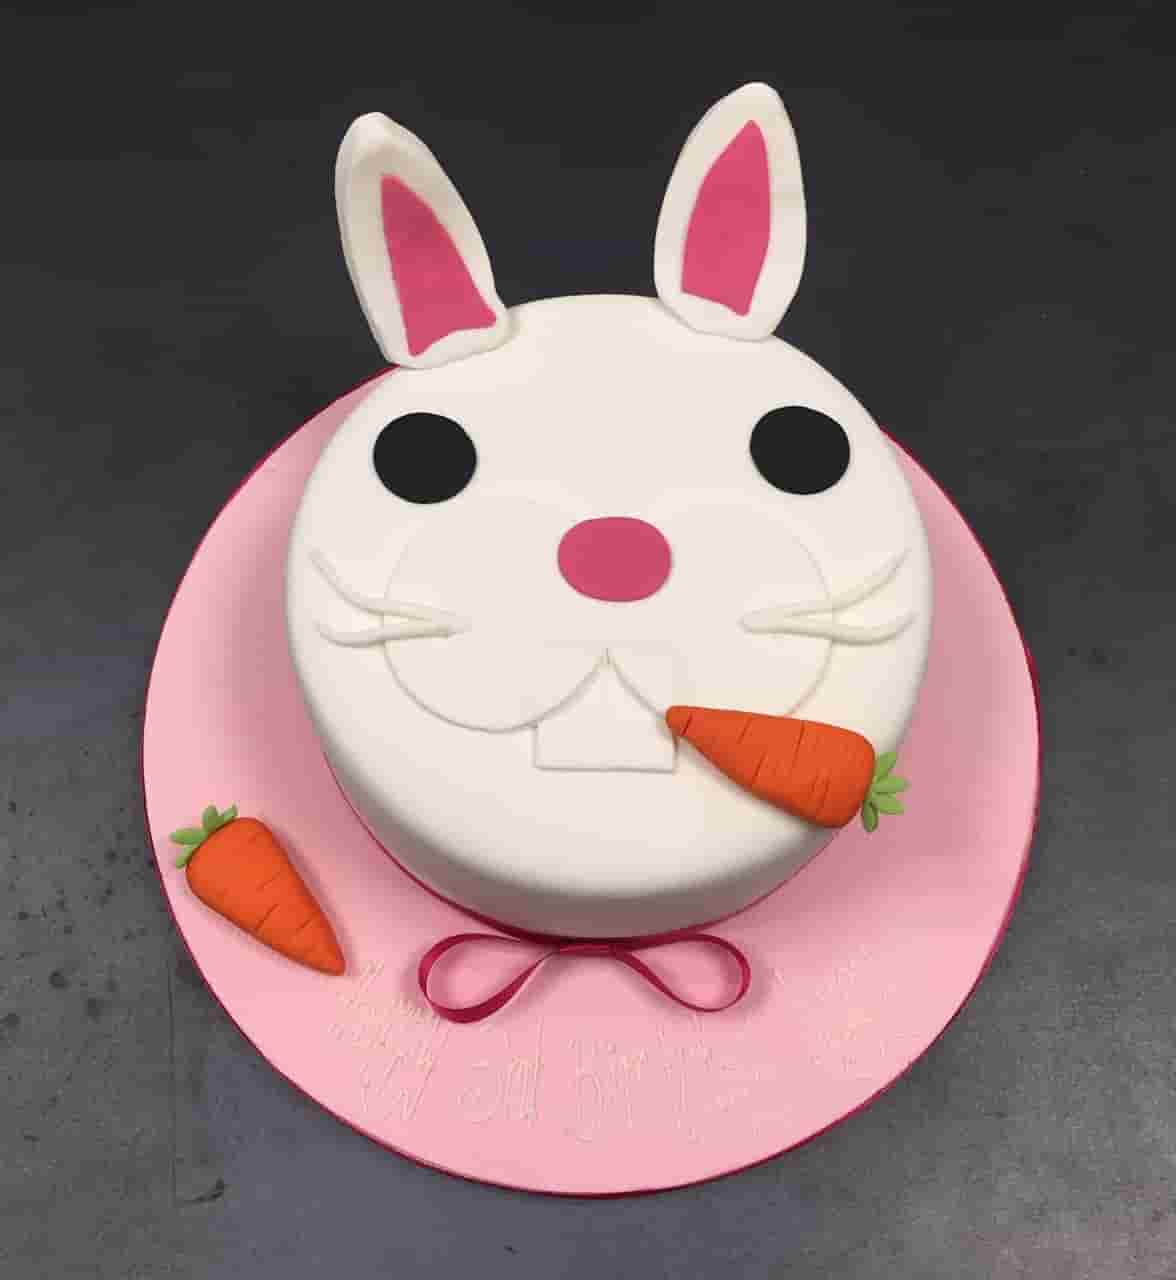 Aggregate more than 69 birthday cake for rabbits - awesomeenglish.edu.vn